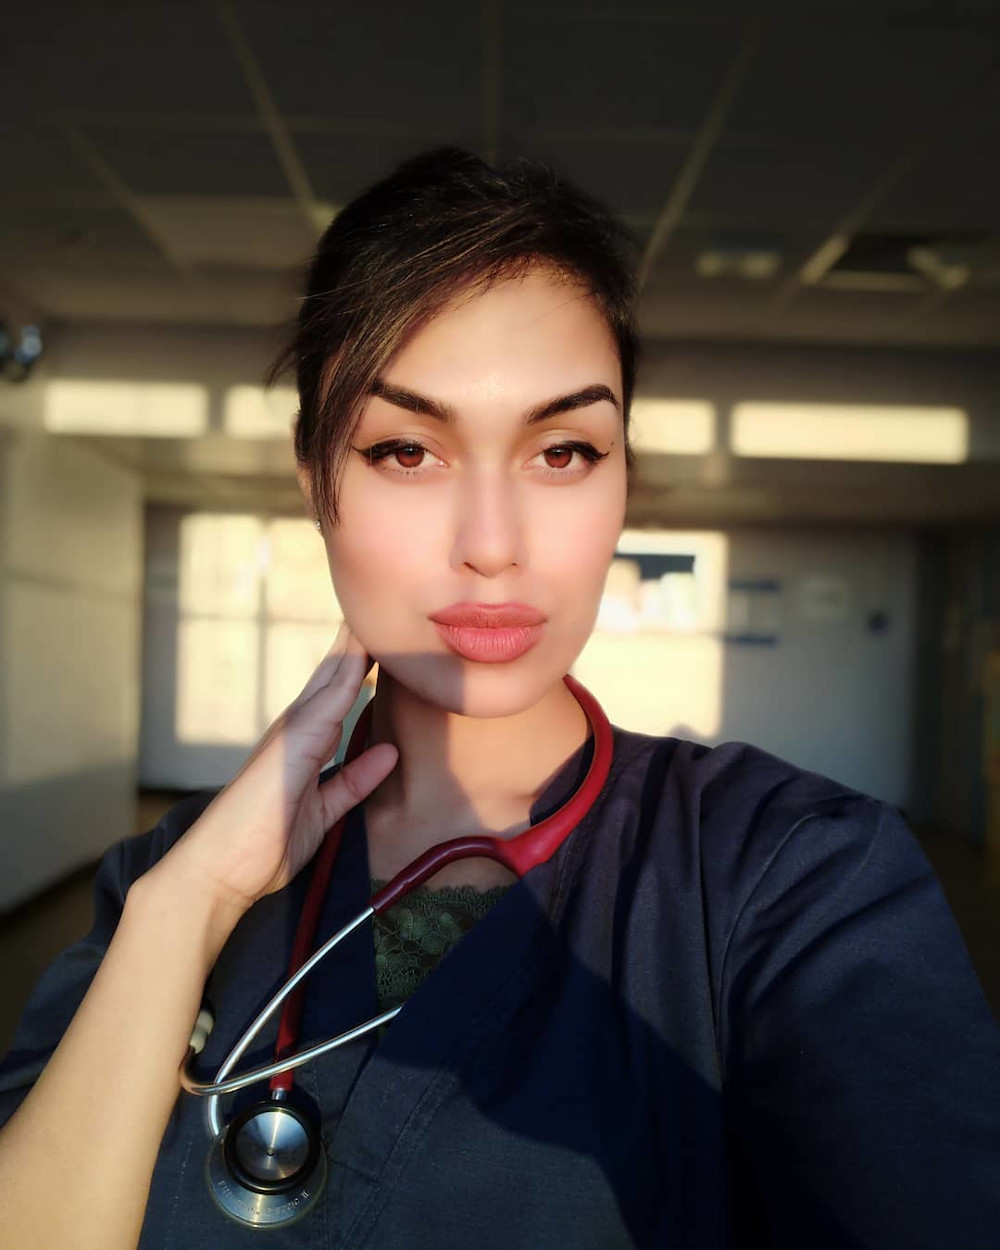 Dr Bhasha Mukherjee was busy with humanitarian work abroad until the Covid-19 Pandemic hit the world and she chose to serve her country as a frontliner. — Picture from Instagram/Dr Bhasha Mukherjee